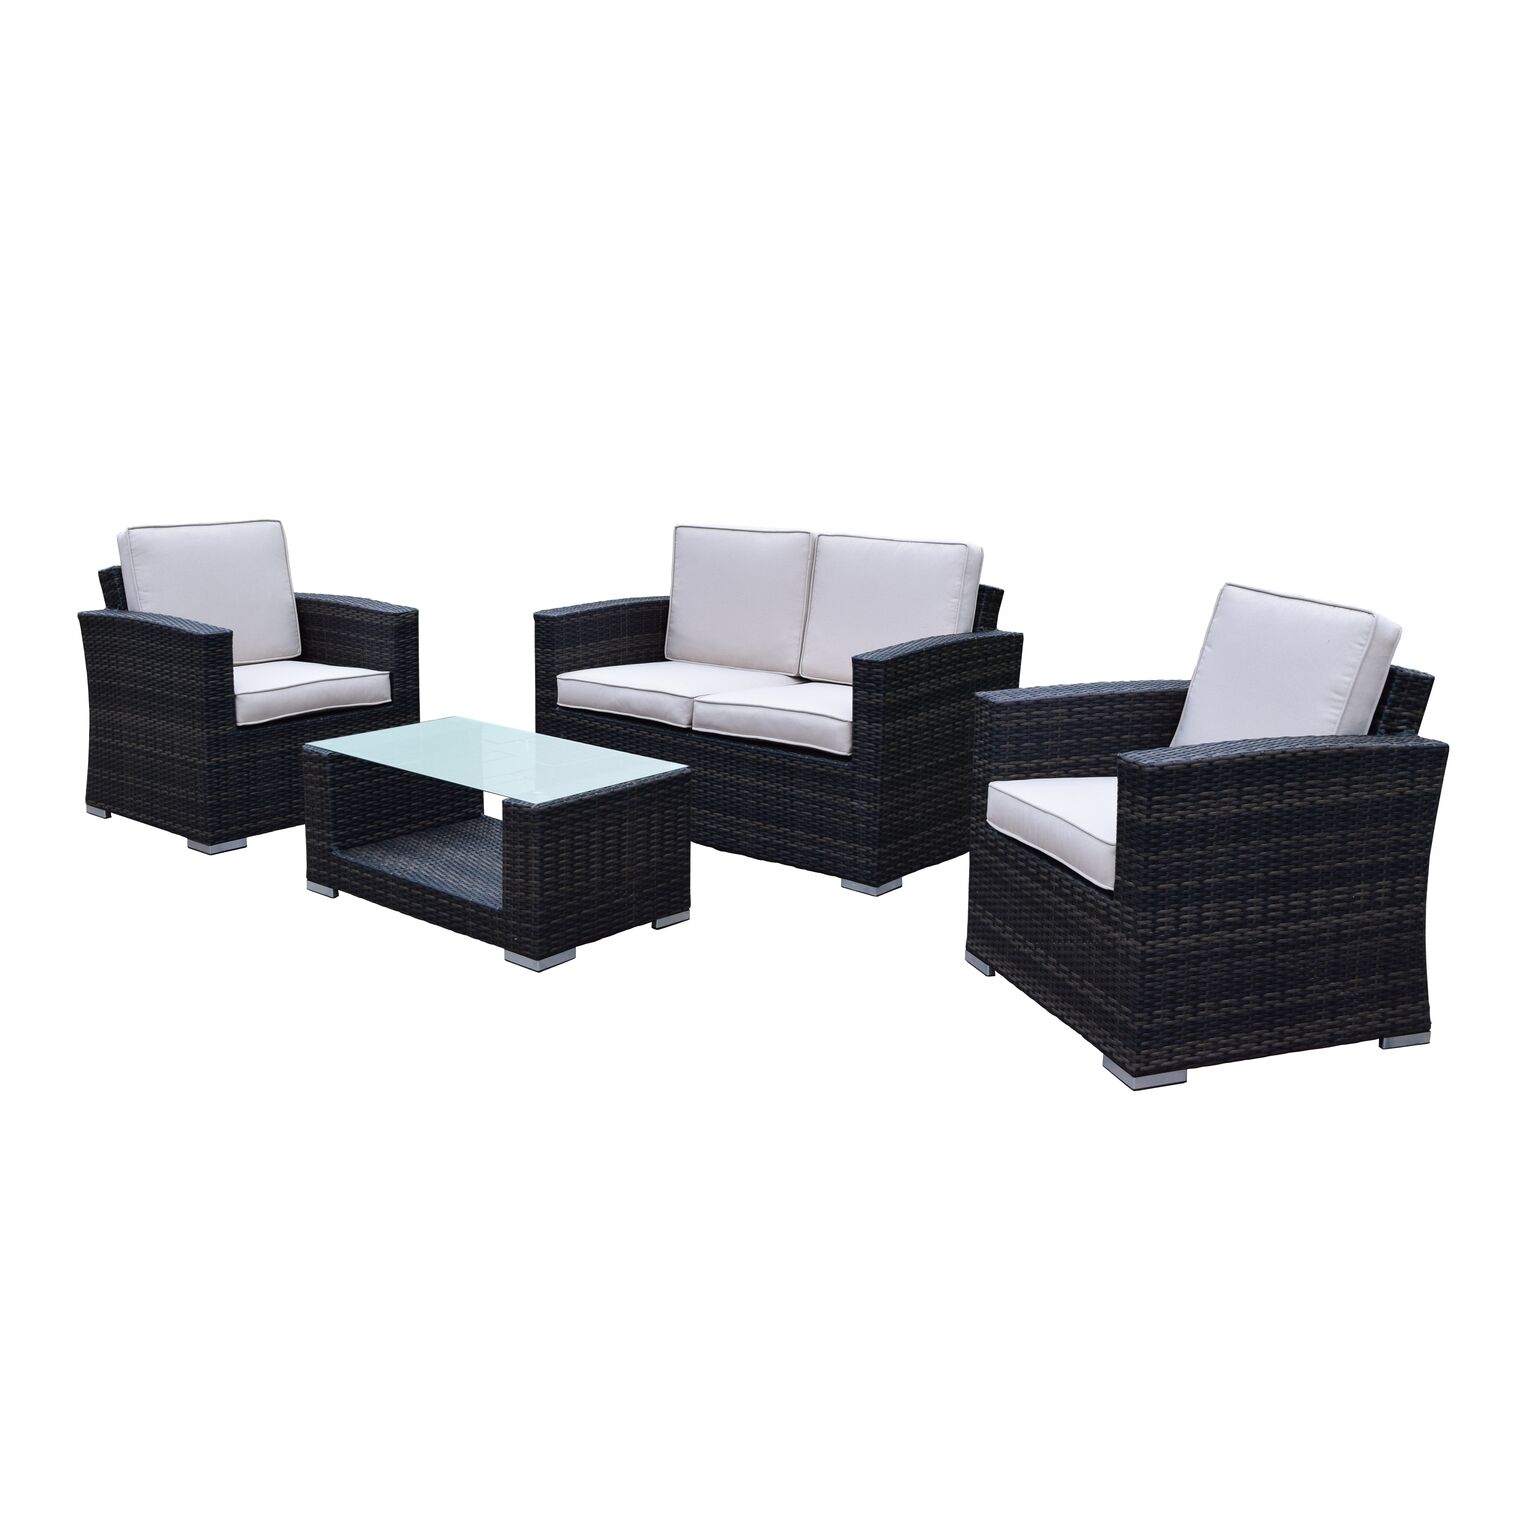 Outdoor Living and Style 4-Piece Black Resin Wicker Chat Set - Gray Cushions - image 3 of 3